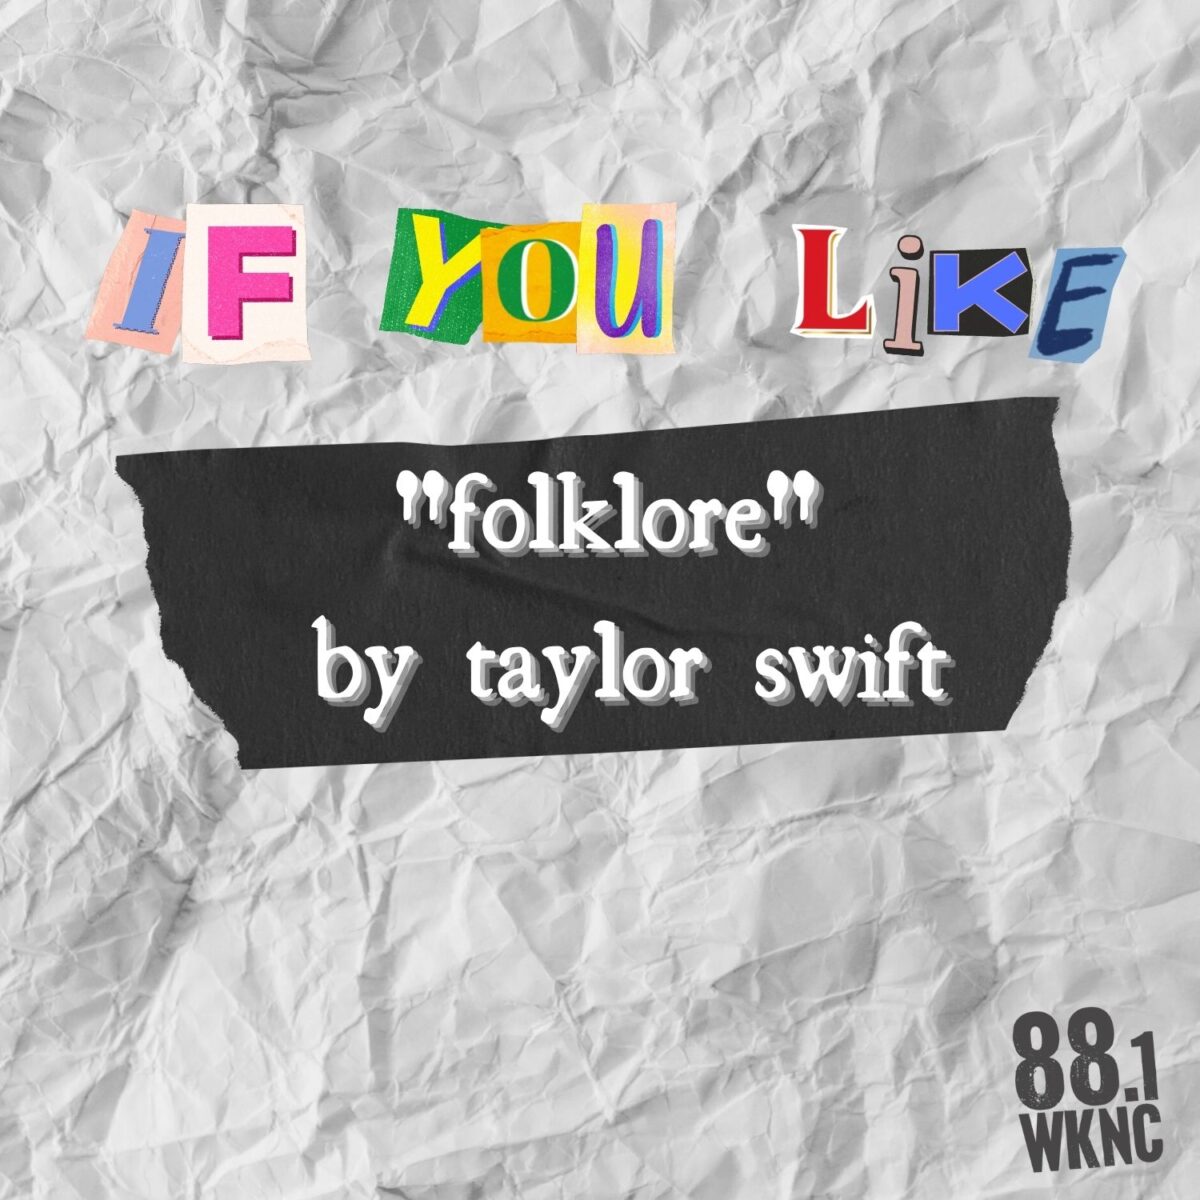 Crumpled white paper background with black tape in the center. Above the tape there are graphic letters that look as if they were cut out of a magazine spelling out the words “if you like.” Atop the tape there is white text that reads “‘folklore’ by taylor swift.” In the bottom right corner there is an “88.1” symbol to represent WKNC.